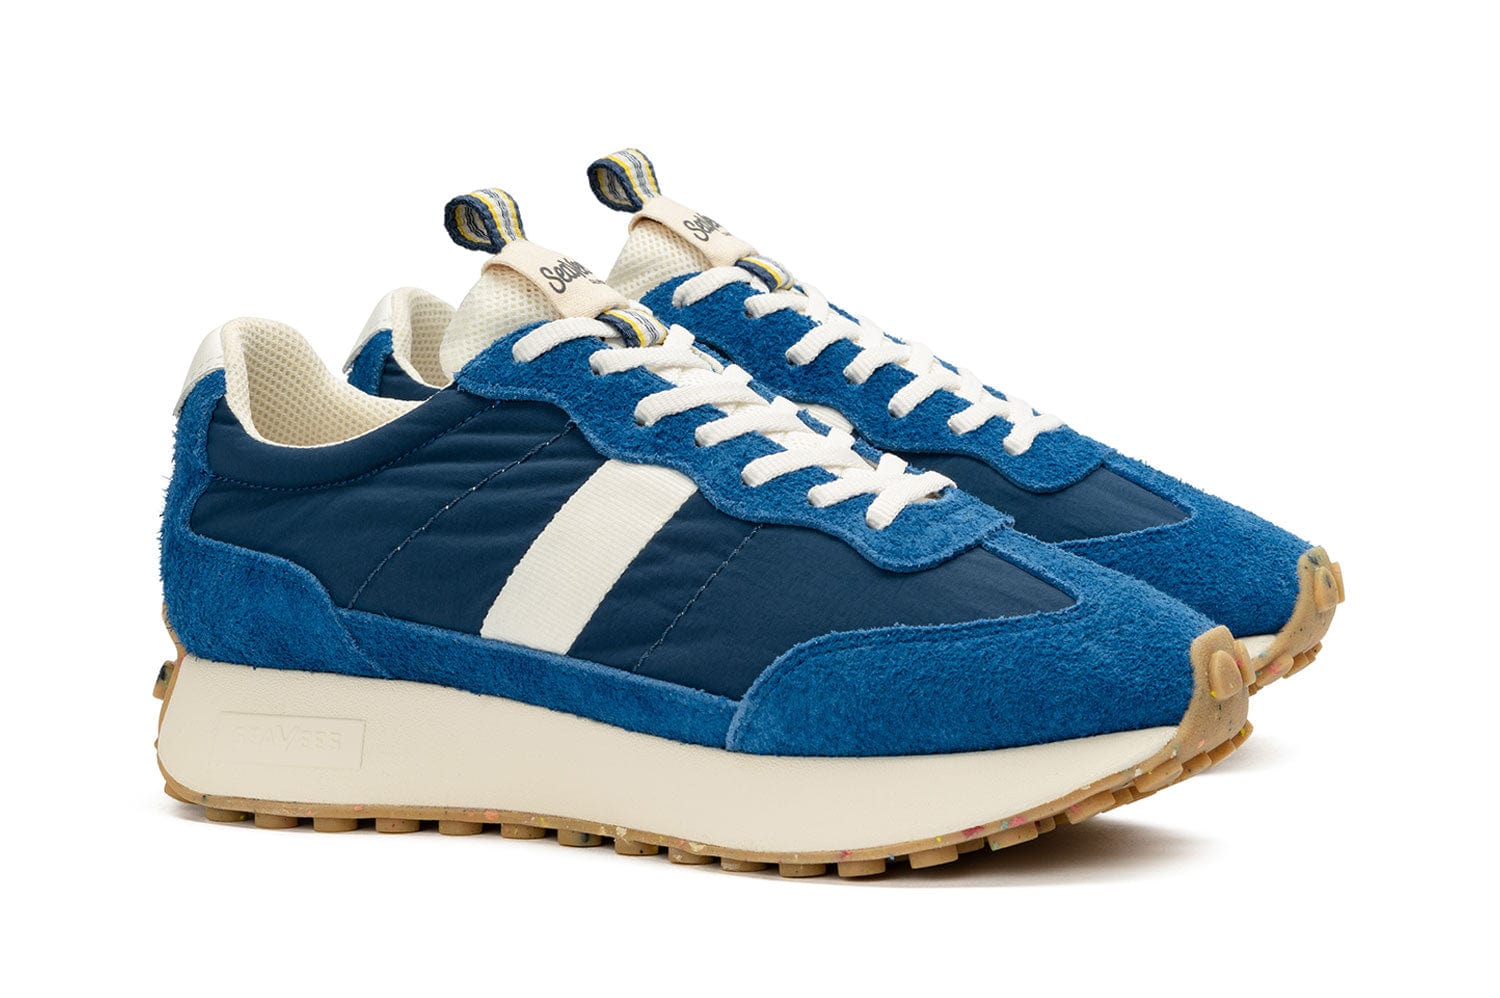 A pair of SeaVees 'Acorn' sneakers in Varsity Blue color, angled to show the outer sides of the shoes.